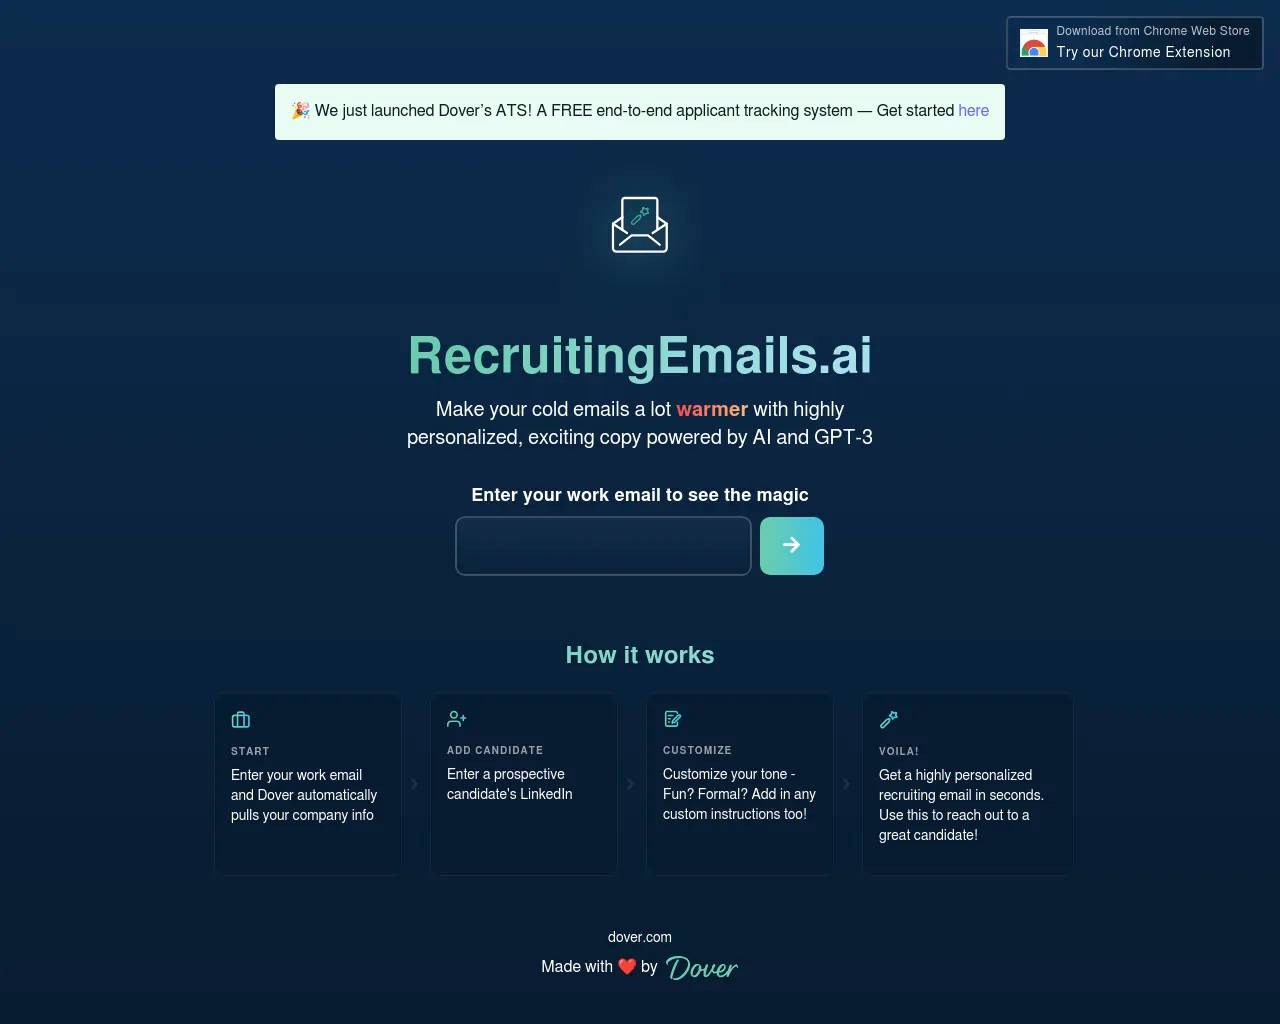 Recruiting Emails AI by Dover screenshot